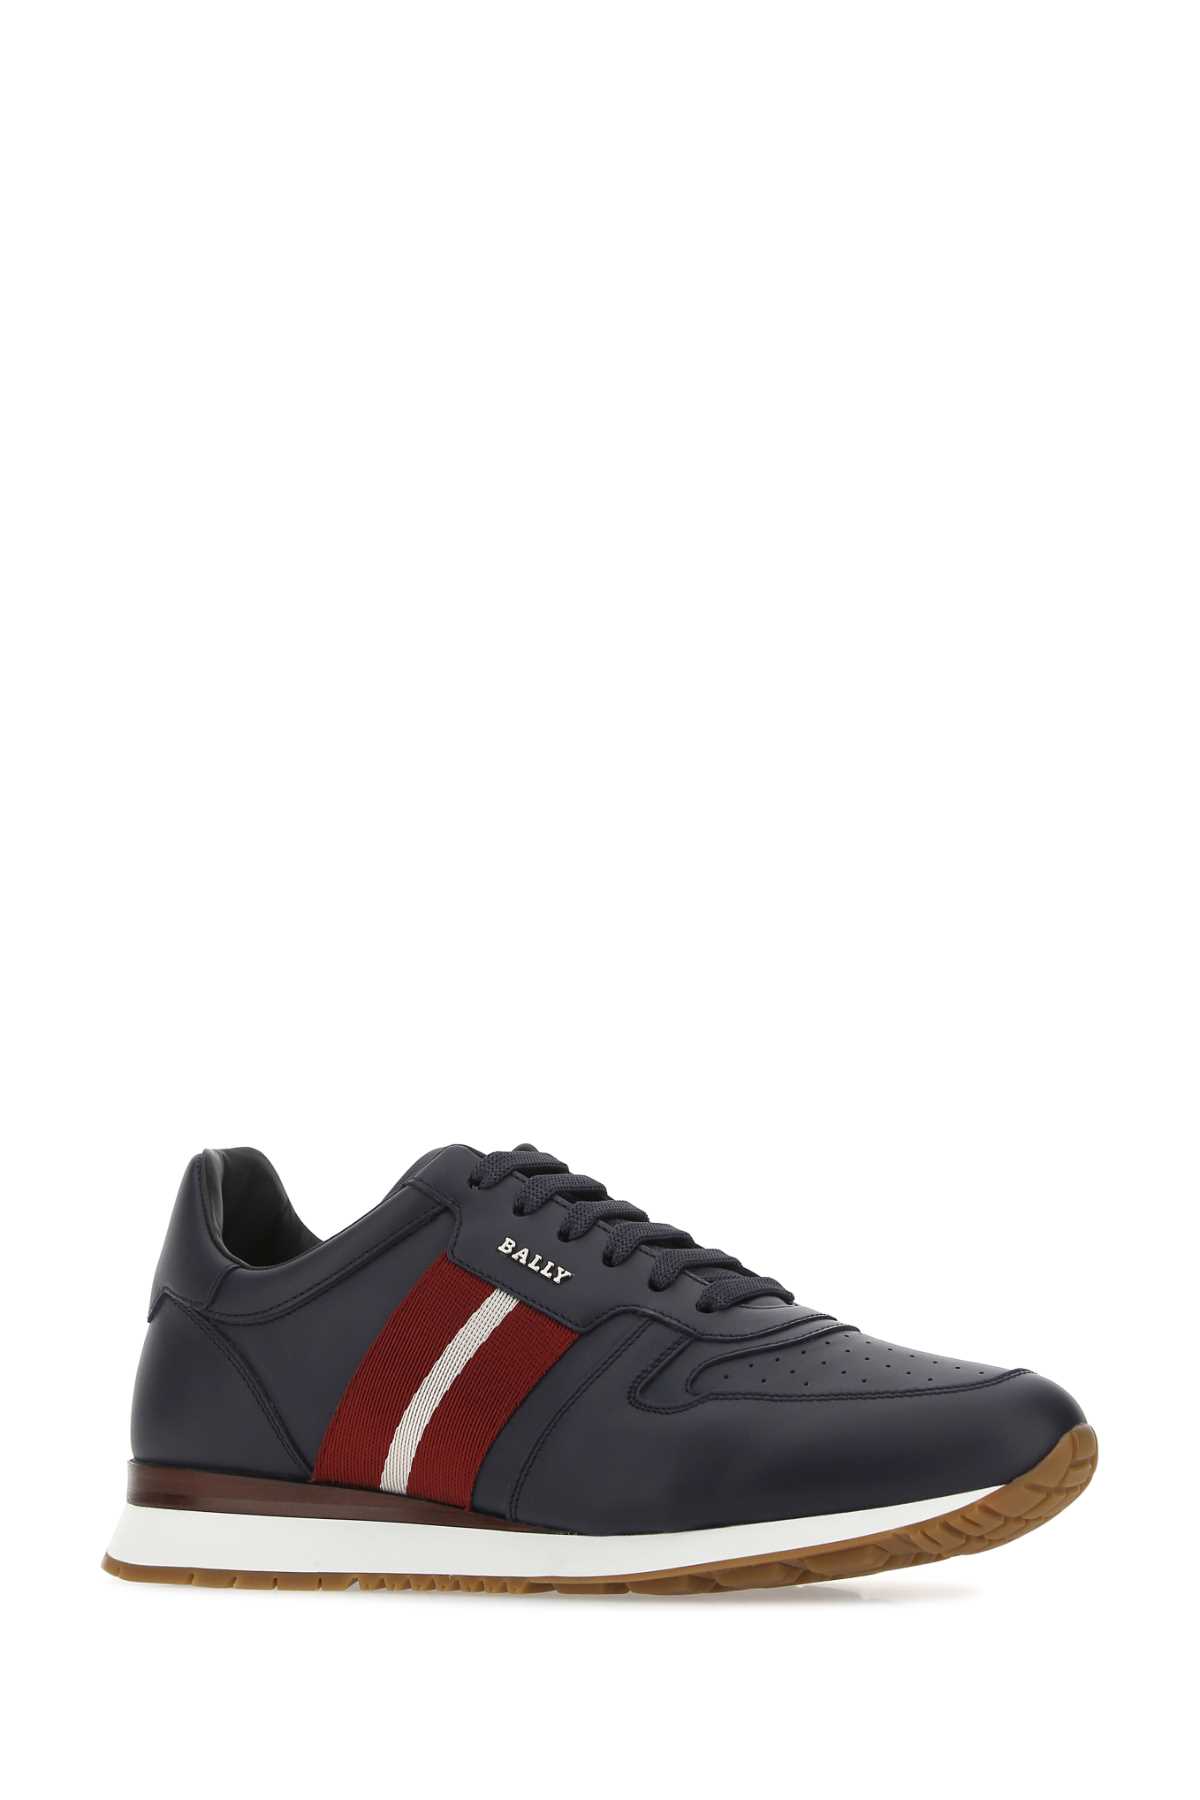 Shop Bally Blue Leather Astel Sneakers In Ink15